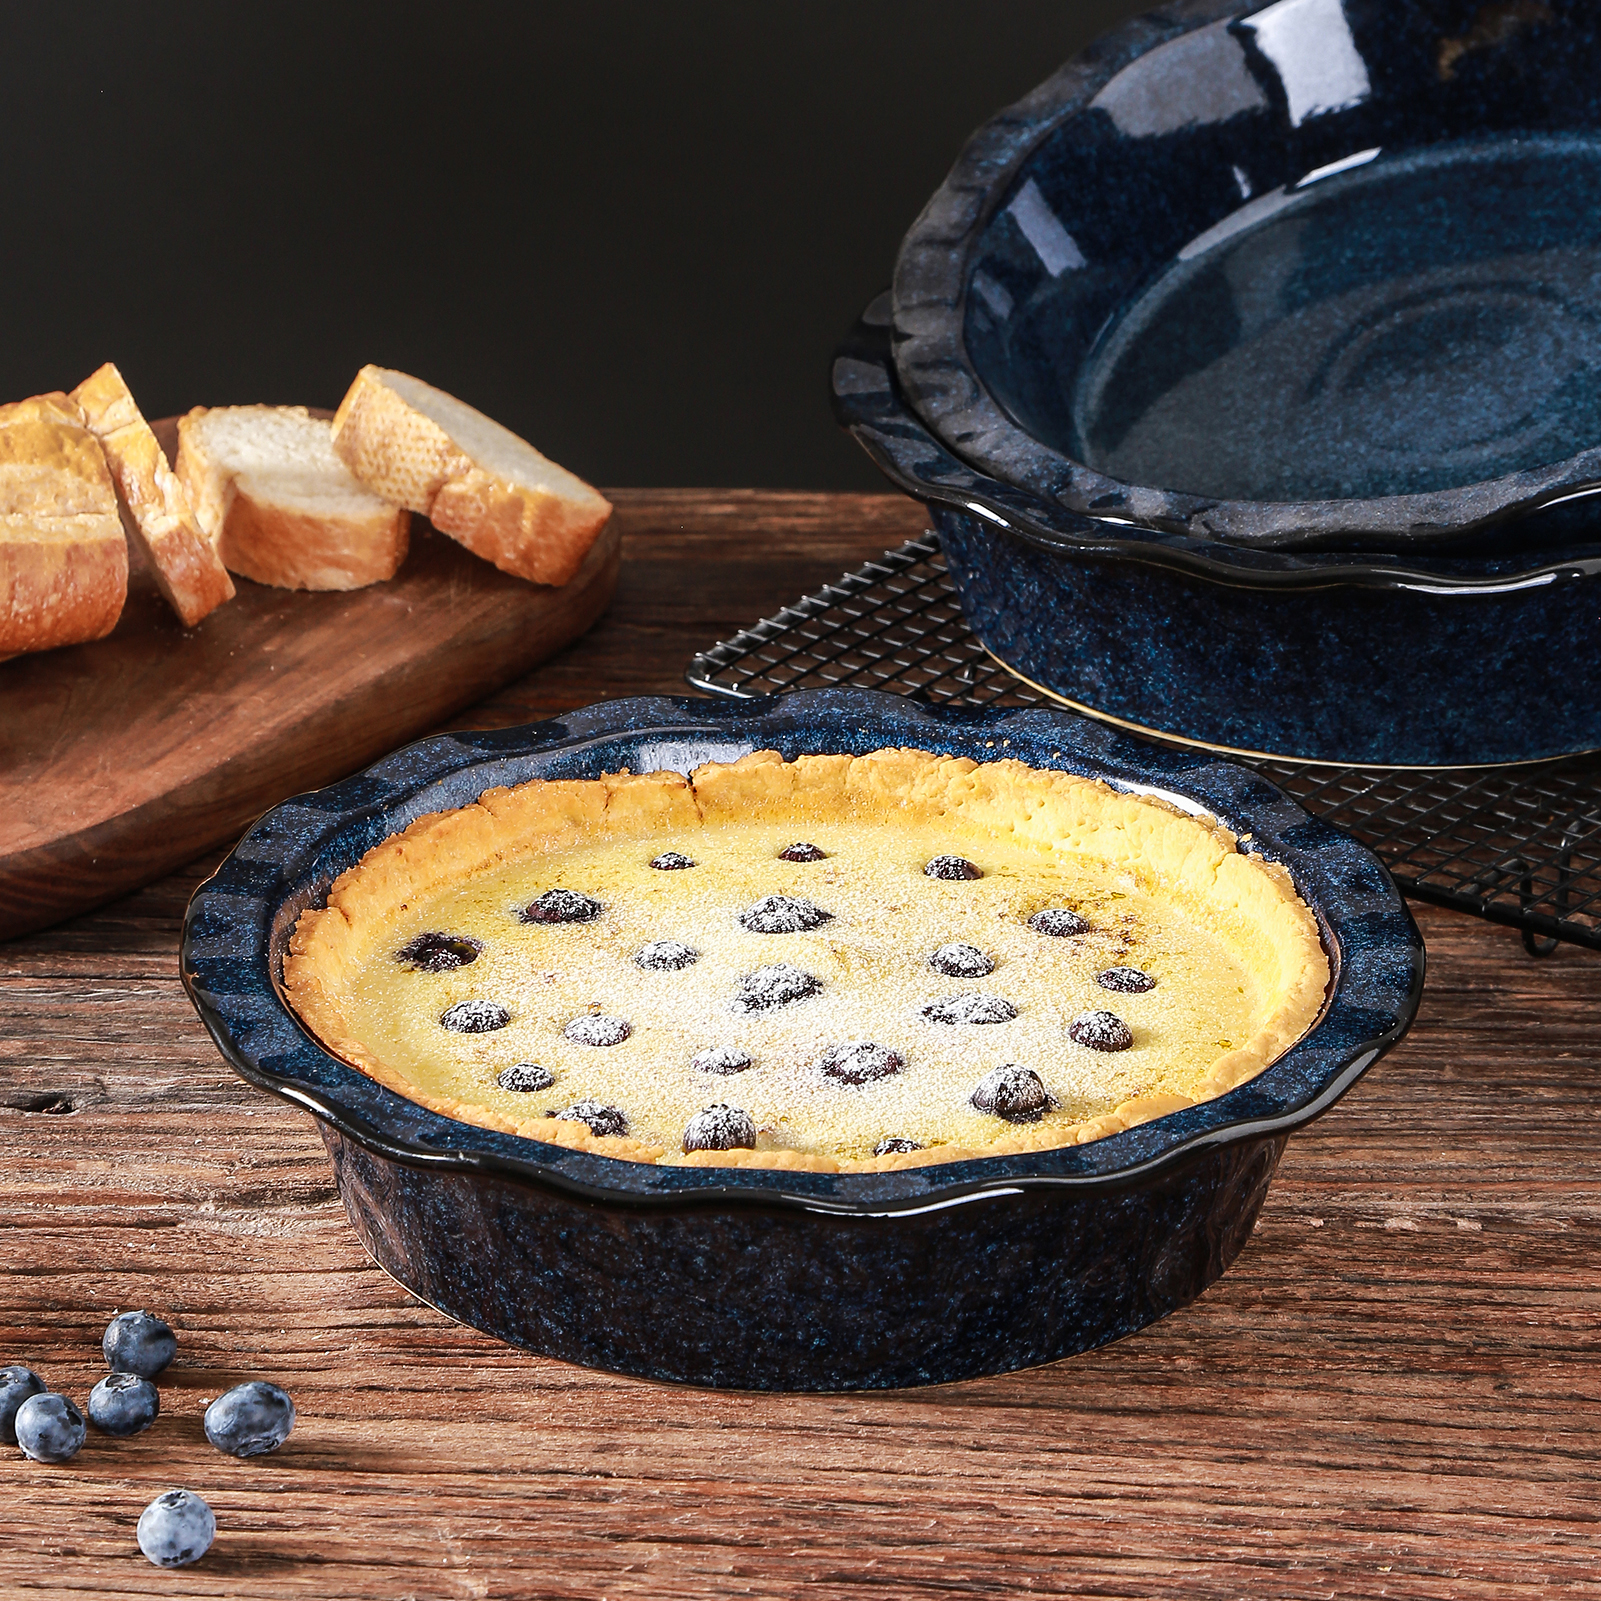 VICRAYS Ceramic Pie Pan for Baking - 9 inch Pie Plate, Round, Fluted and  Deep Pie Dish for Tart, Pizza, Apple Pie, Quiche, Pot Pies, Cake - Reactive  Glaze (Starry Blue) - Vicrays Ceramics